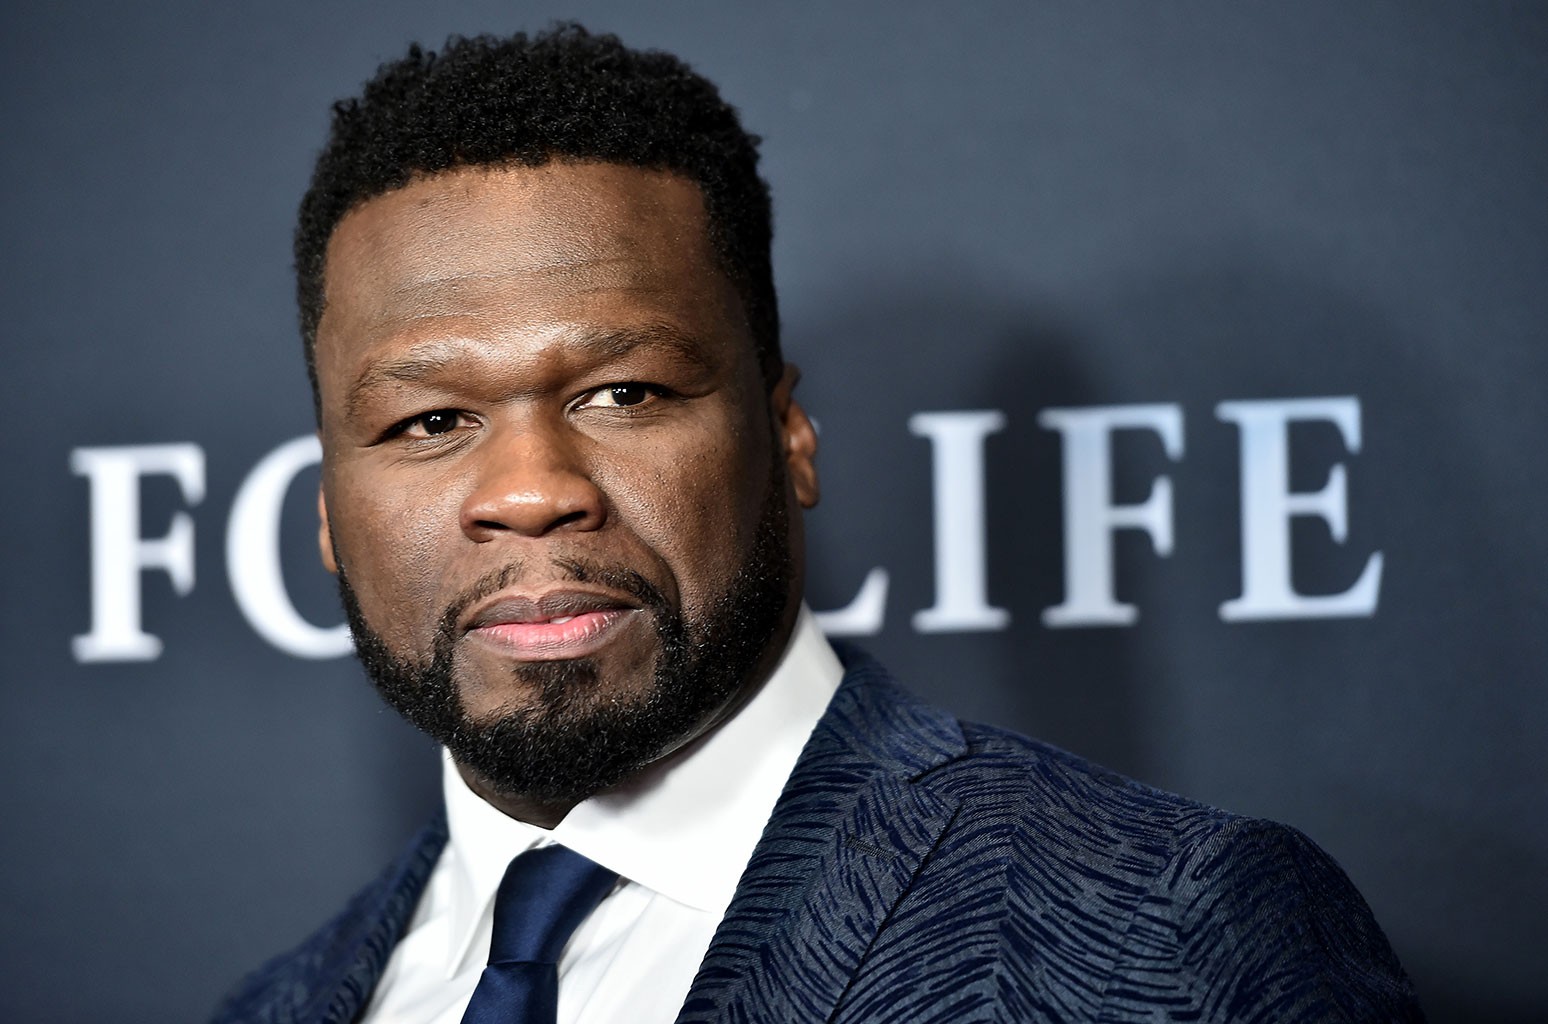 50 Cent Net Worth - From Rapping To Being A Businessman